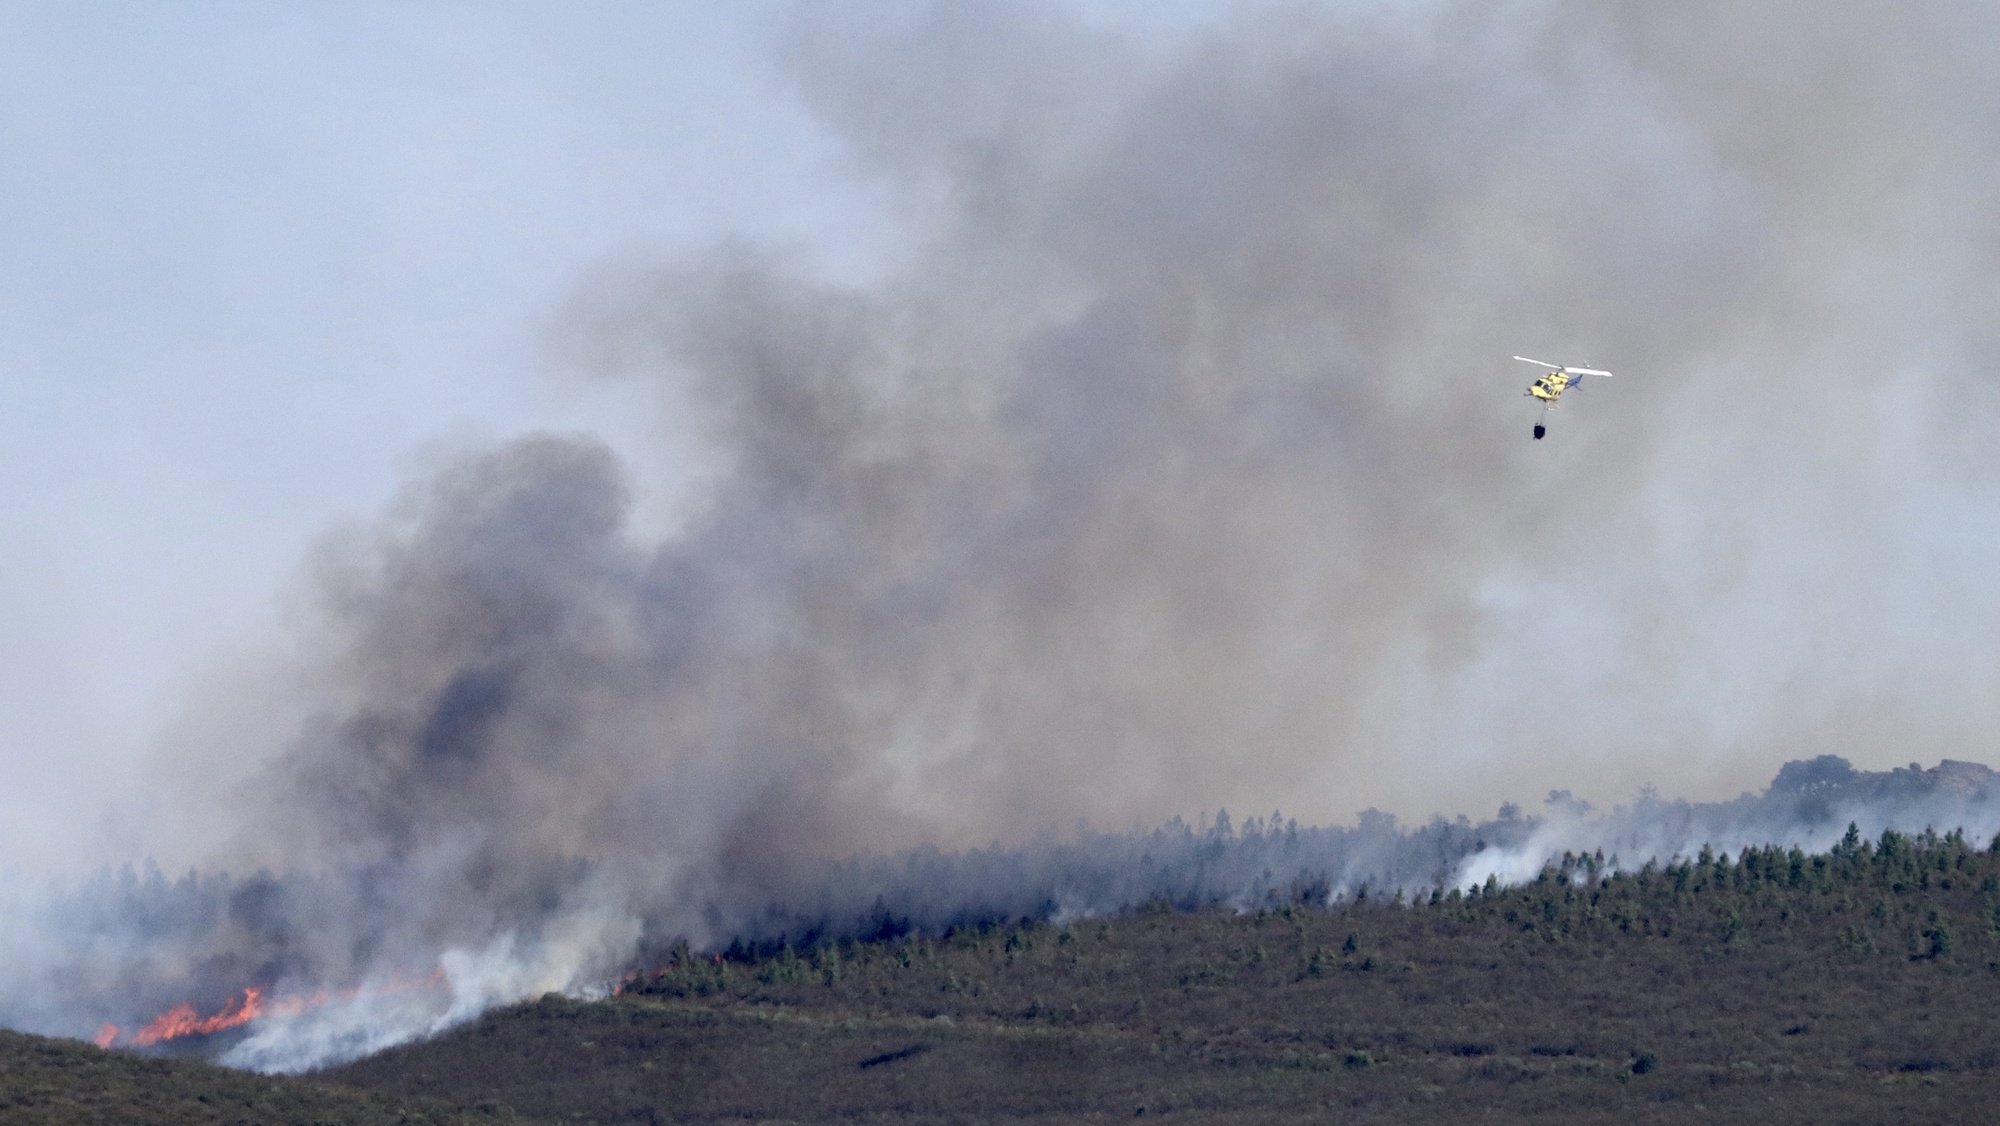 epa10079617 A firefighting helicopter flies over a forest fire in Losacio, province of Zamora, Spain, 19 July 2022. The fire forced the evacuation of some 34 towns and forced the closing of the AVE high-speed train line.  EPA/MARIAM A. MONTESINOS